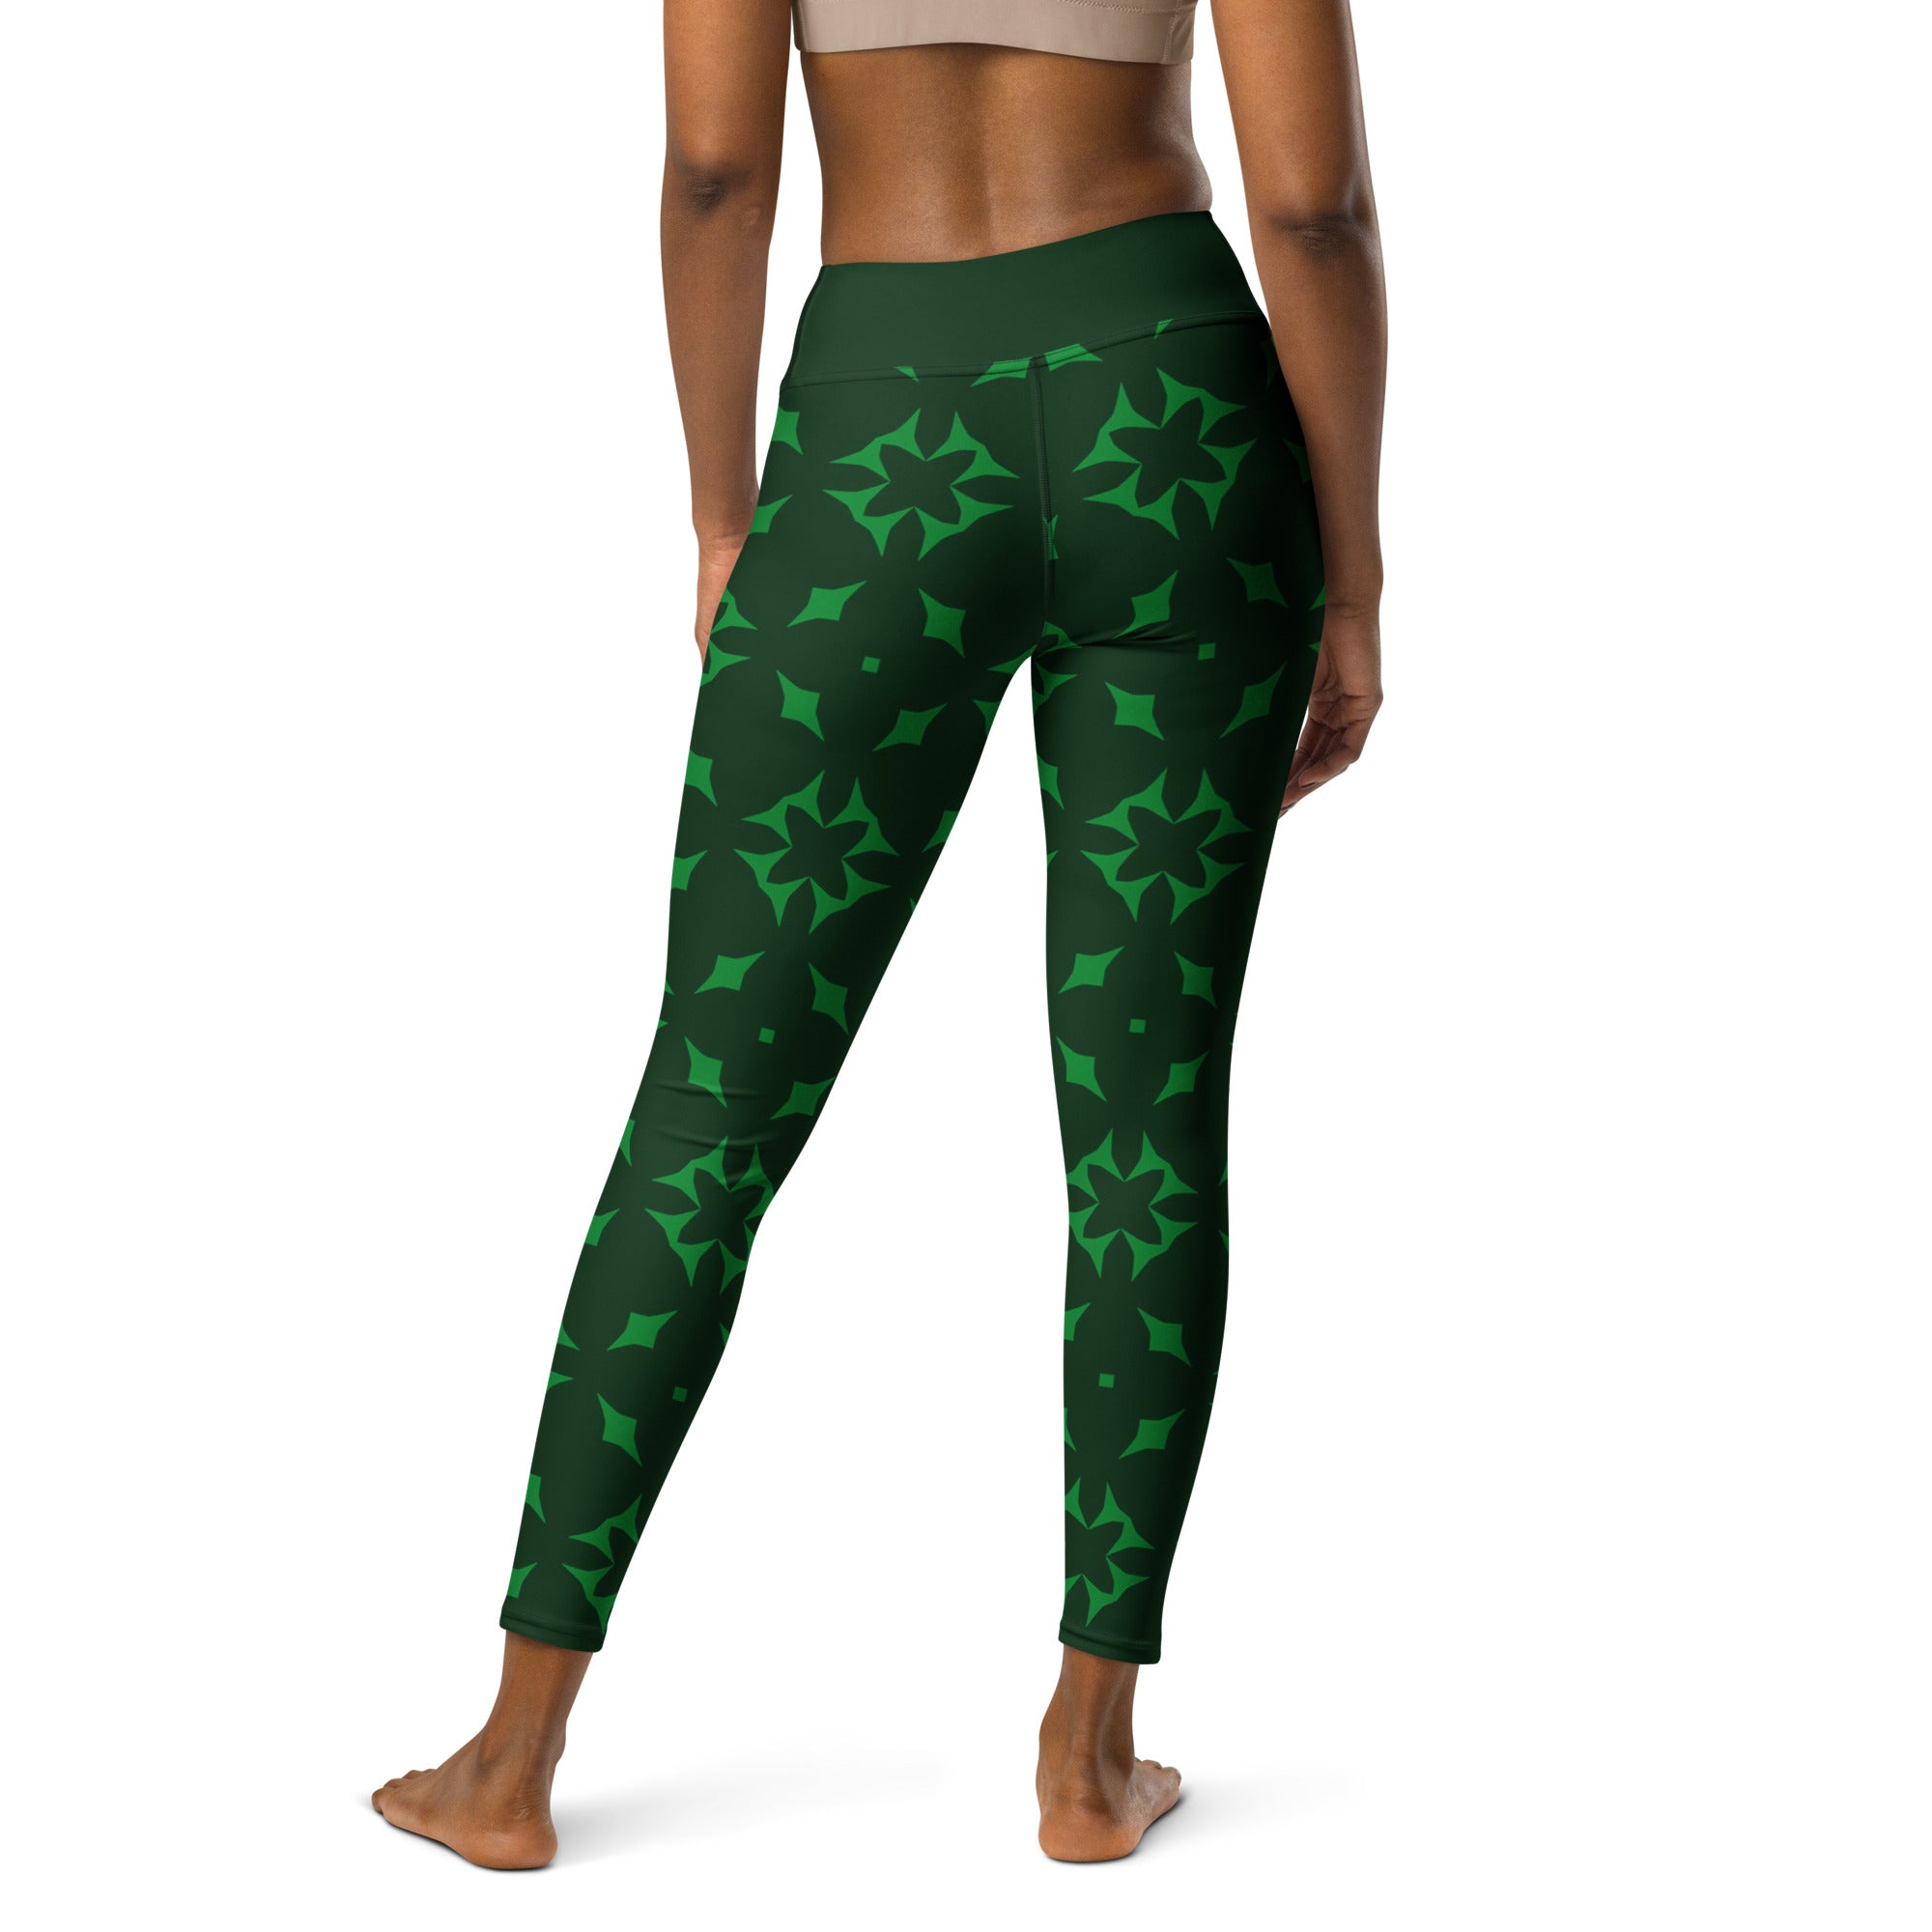 Stylish and comfortable Blossom Burst Leggings for yoga and fitness enthusiasts.